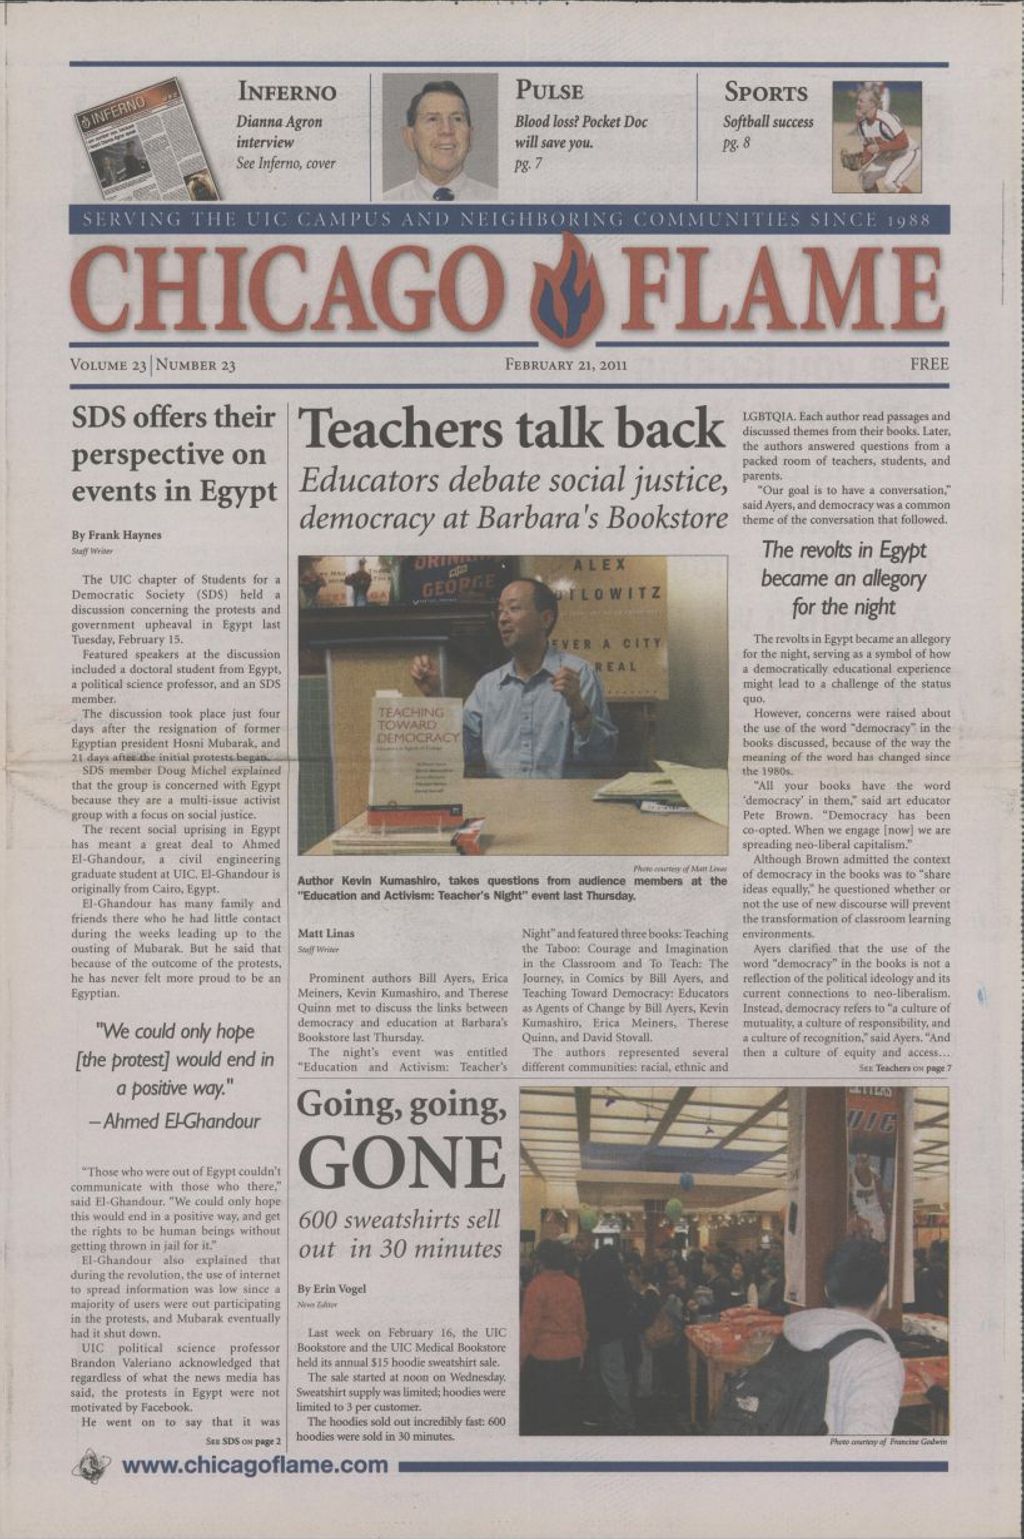 Chicago Flame (February 21, 2011)